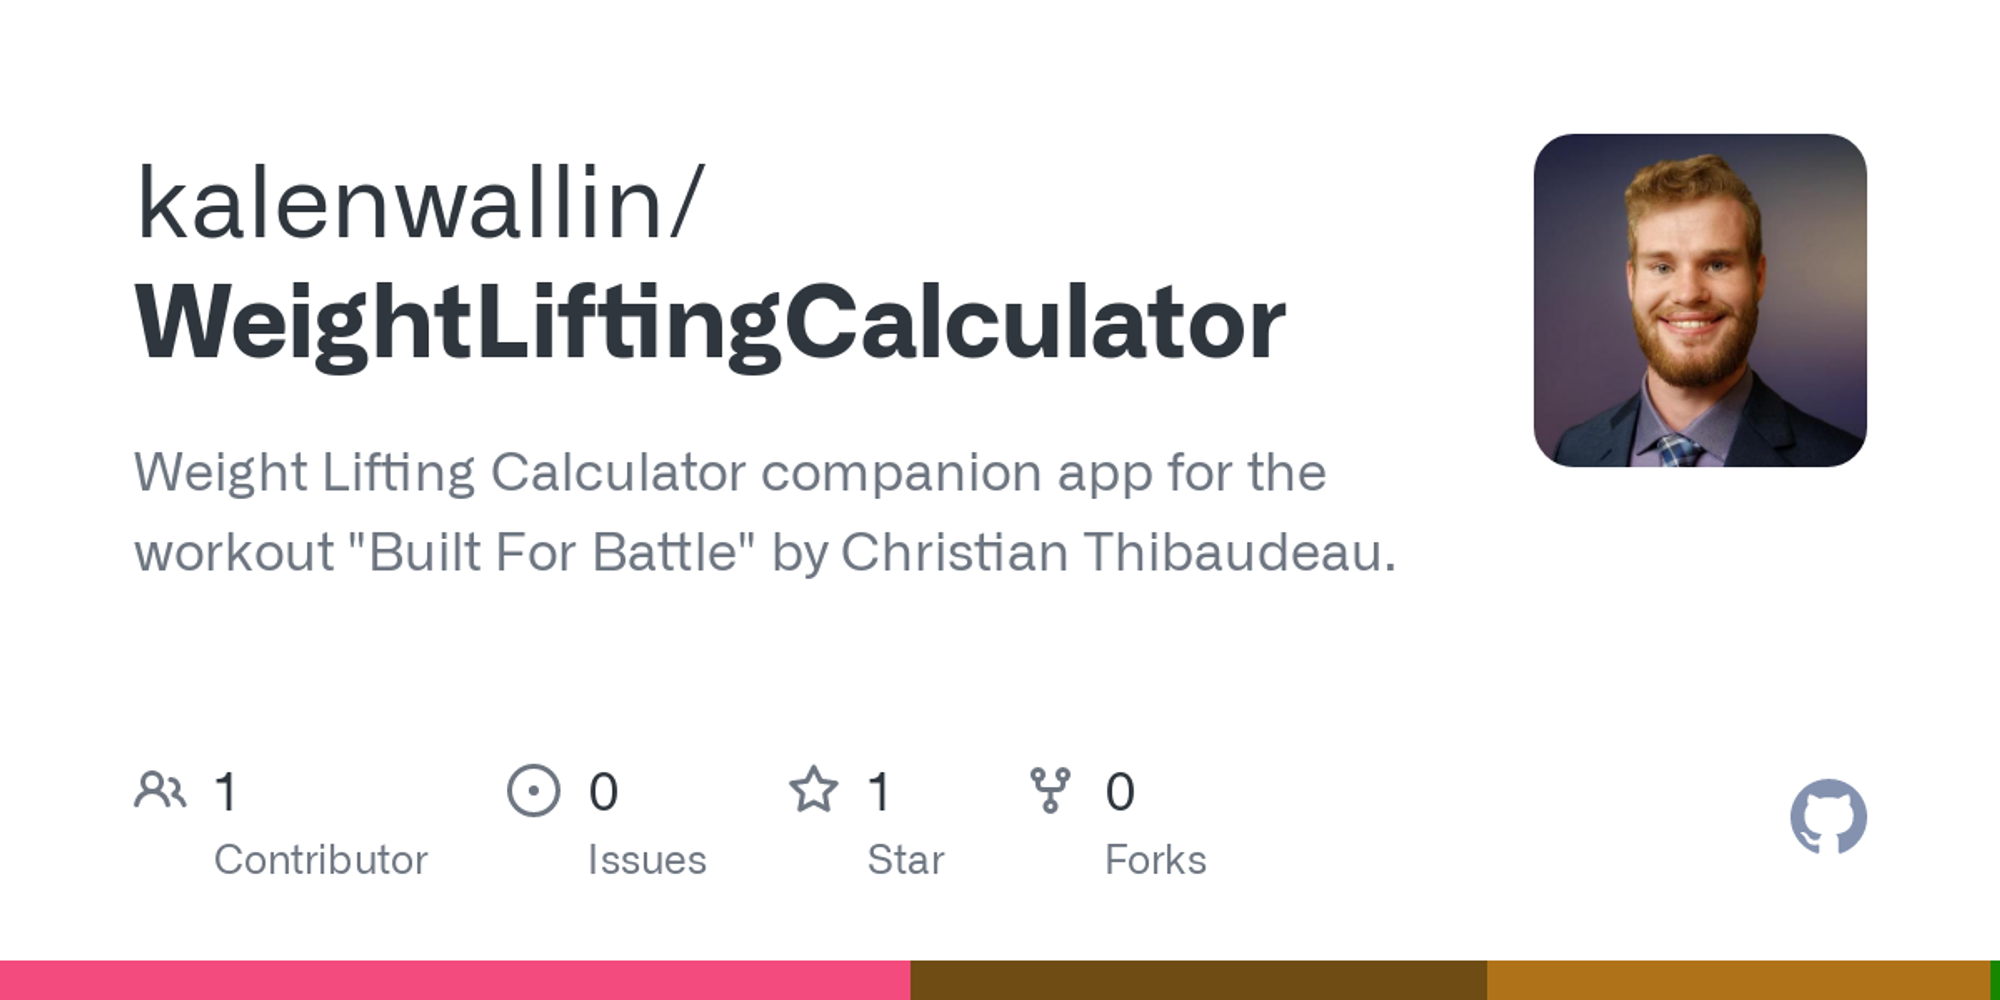 GitHub - kalenwallin/WeightLiftingCalculator: Weight Lifting Calculator companion app for the workout "Built For Battle" by Christian Thibaudeau.